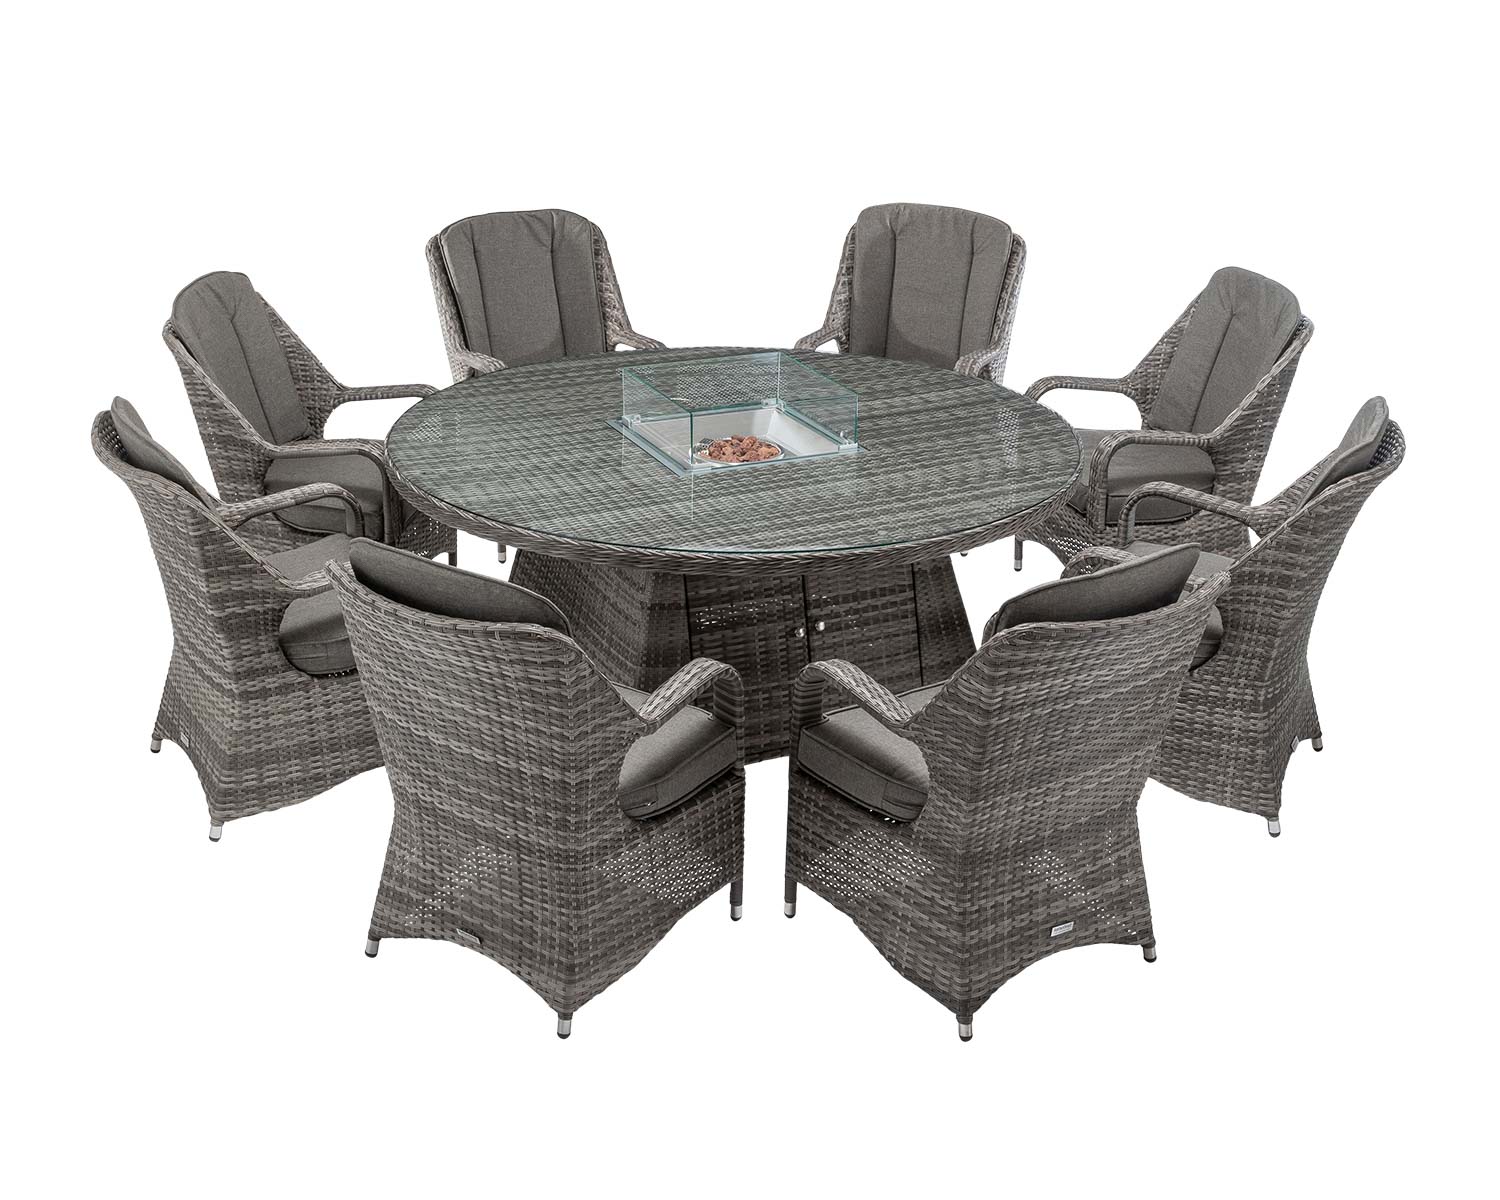 8 Seater Rattan Garden Dining Set With Large Round Table In Grey With Fire Pit Marseille Rattan Direct